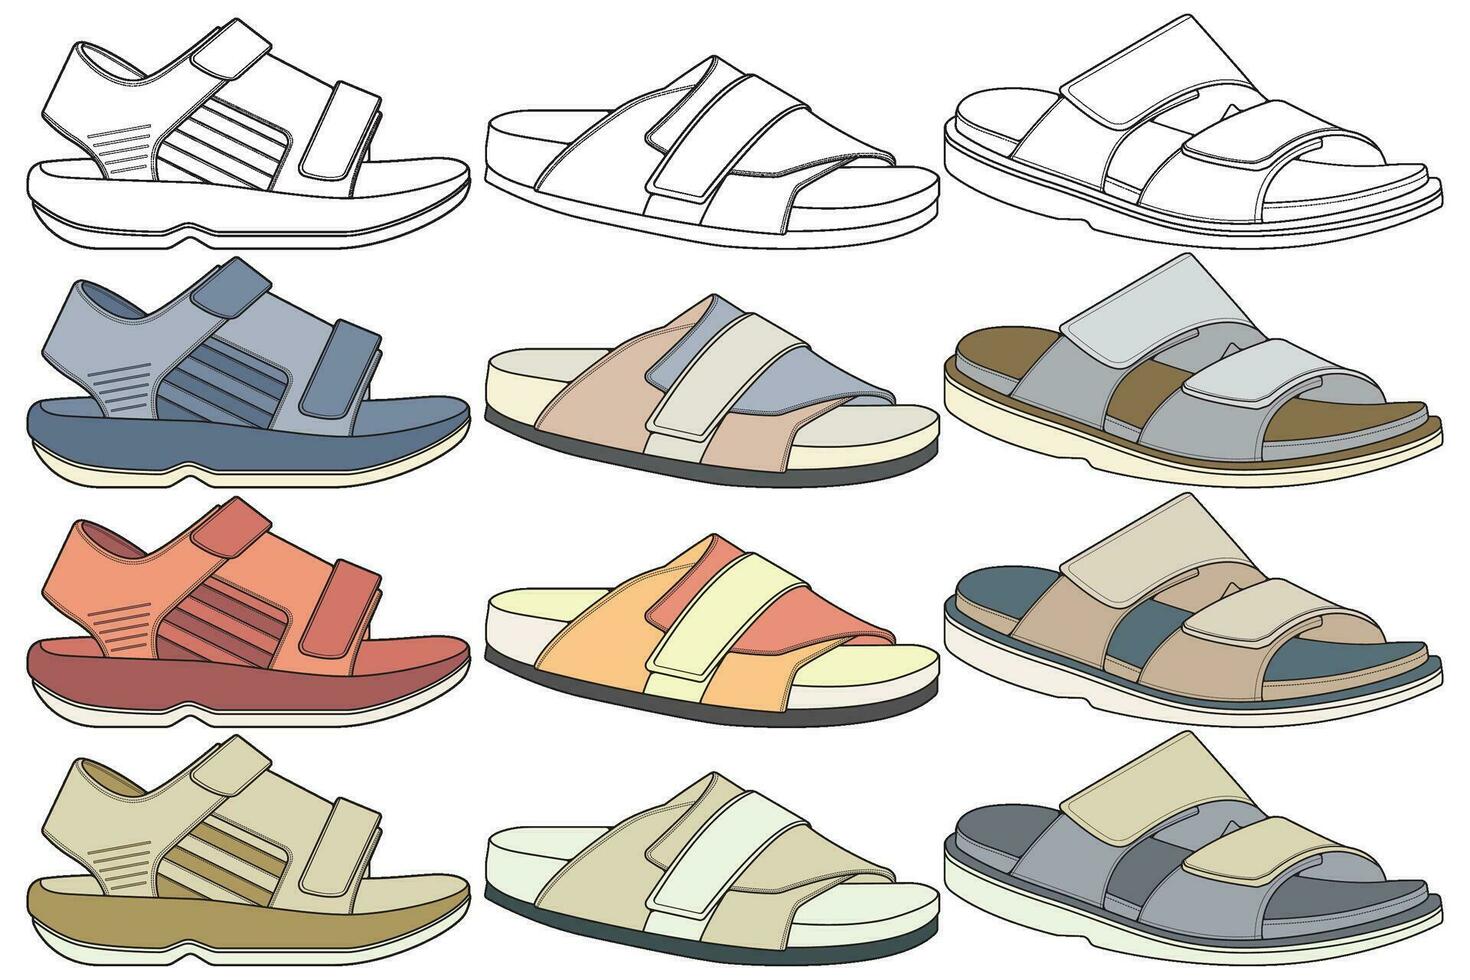 Strap sandals coloring drawing vector, strap sandals drawn in a sketch style, bundling strap sandals template full color, vector Illustration.